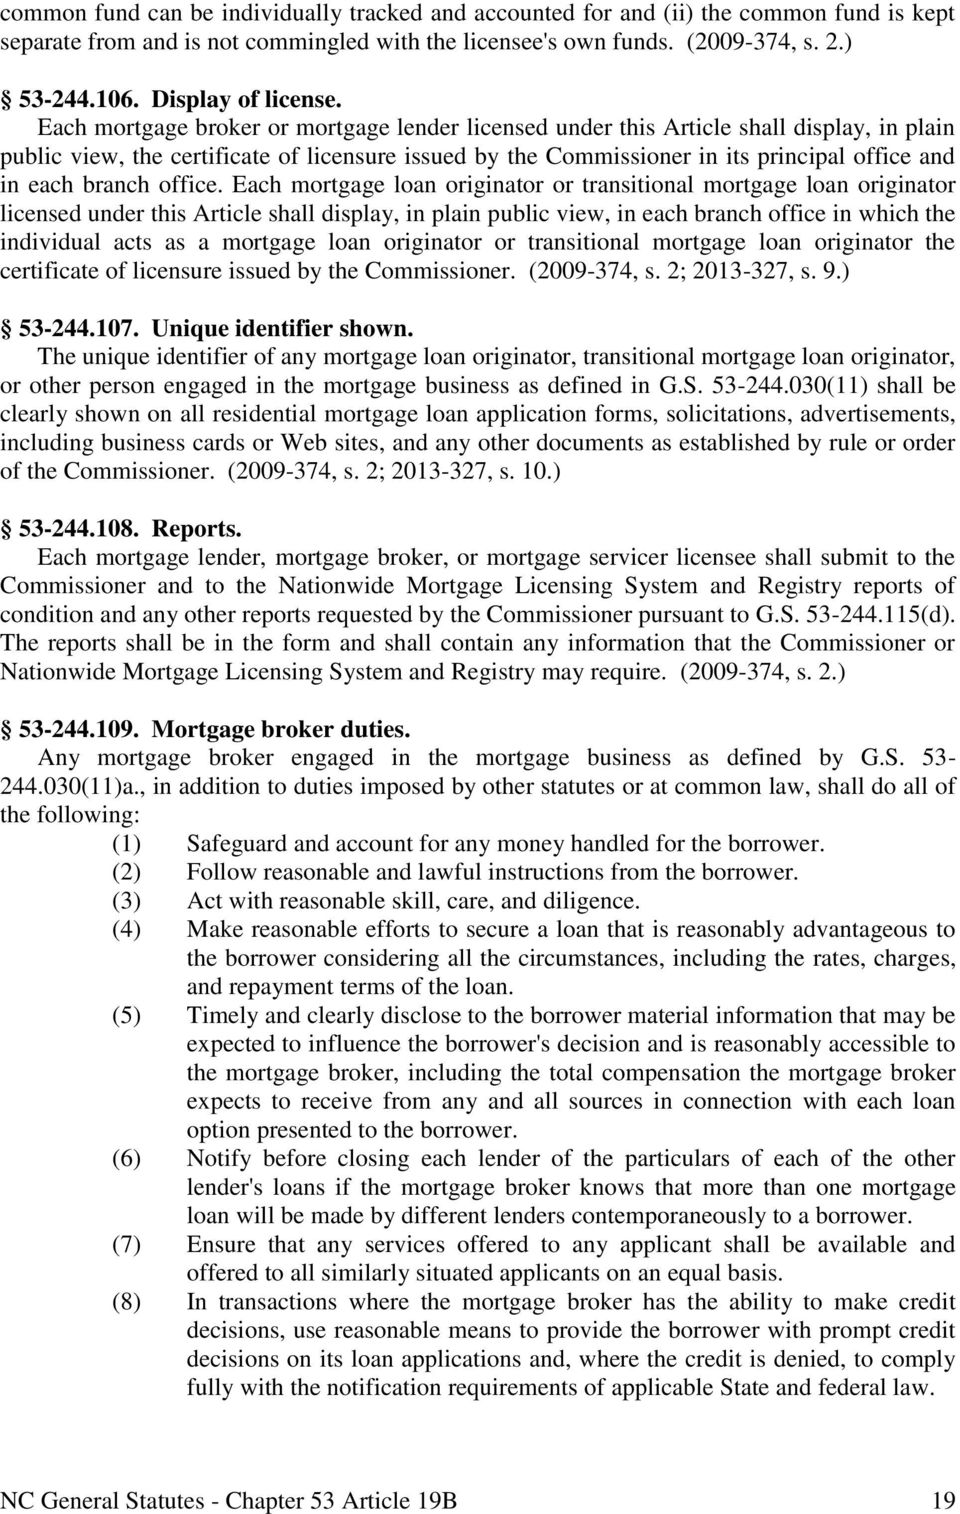 Each mortgage broker or mortgage lender licensed under this Article shall display, in plain public view, the certificate of licensure issued by the Commissioner in its principal office and in each